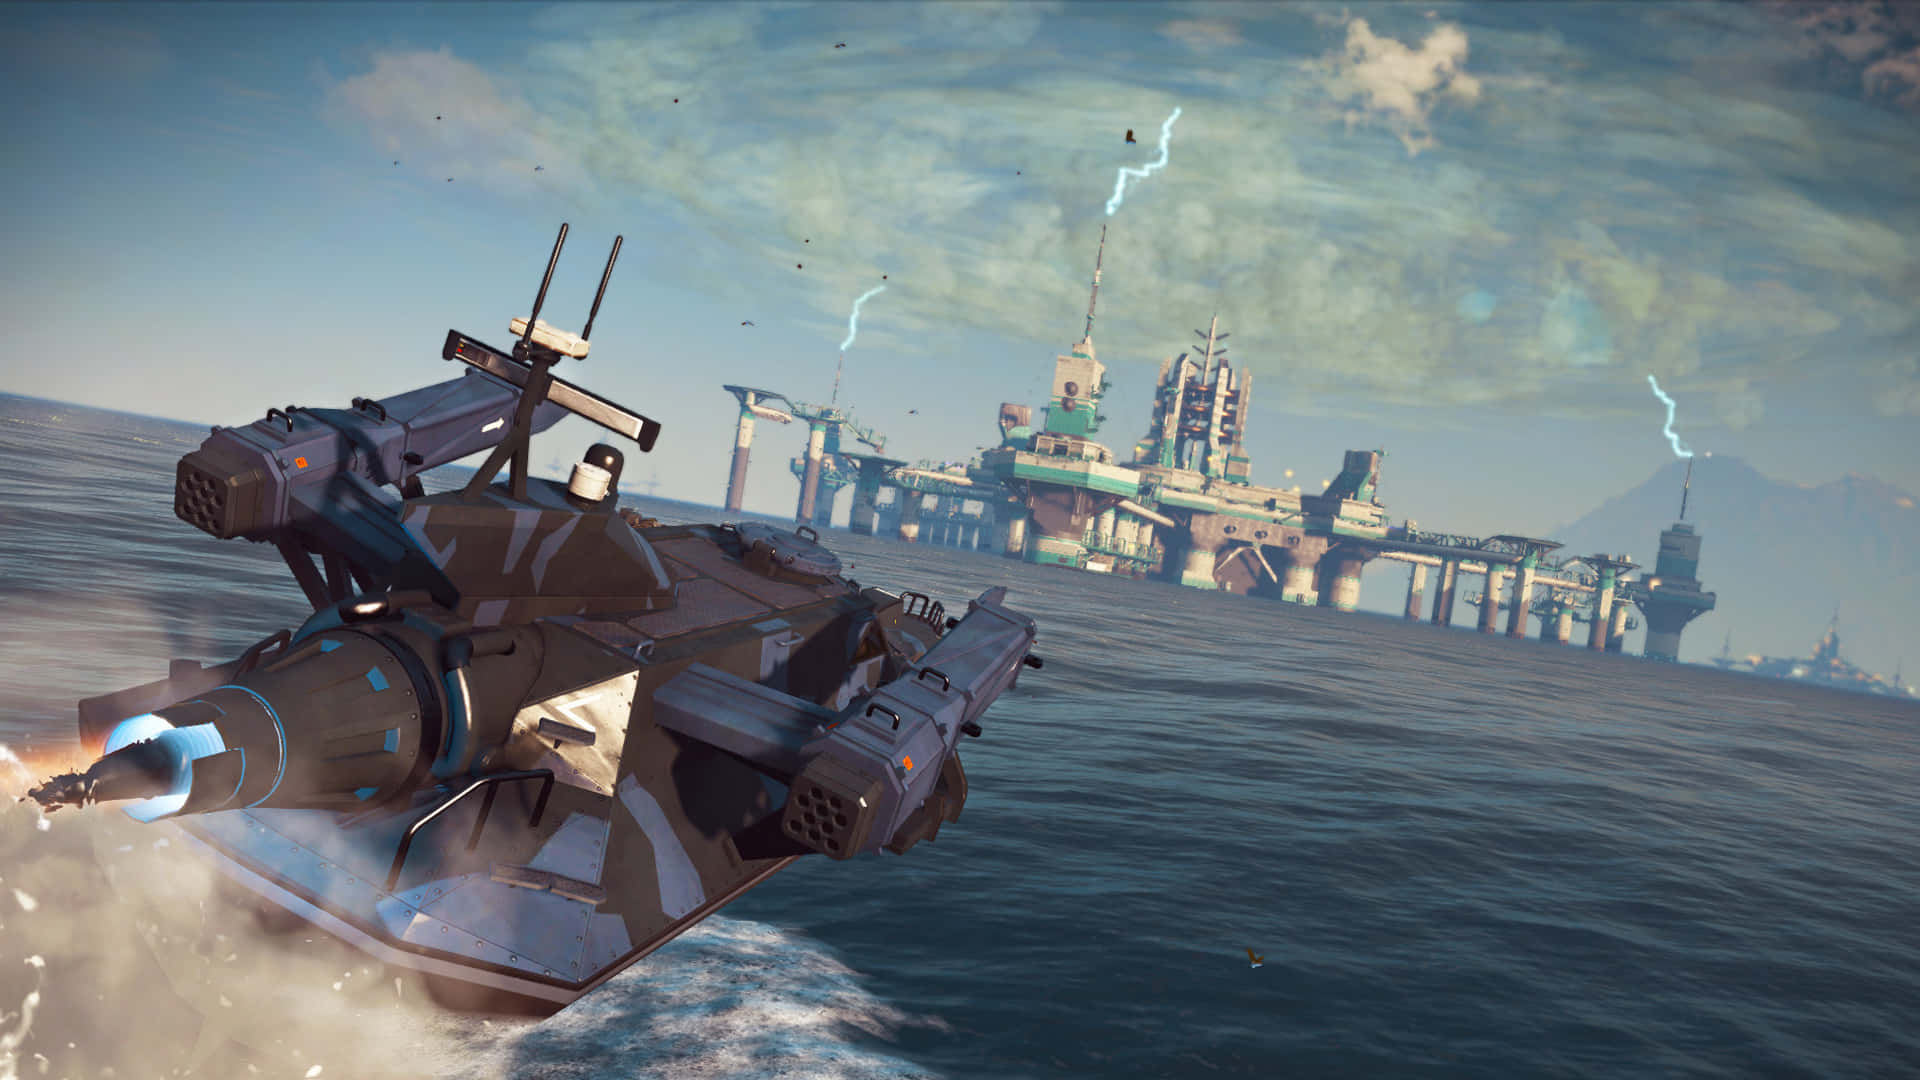 A Ship Is Flying Over The Ocean In A Video Game